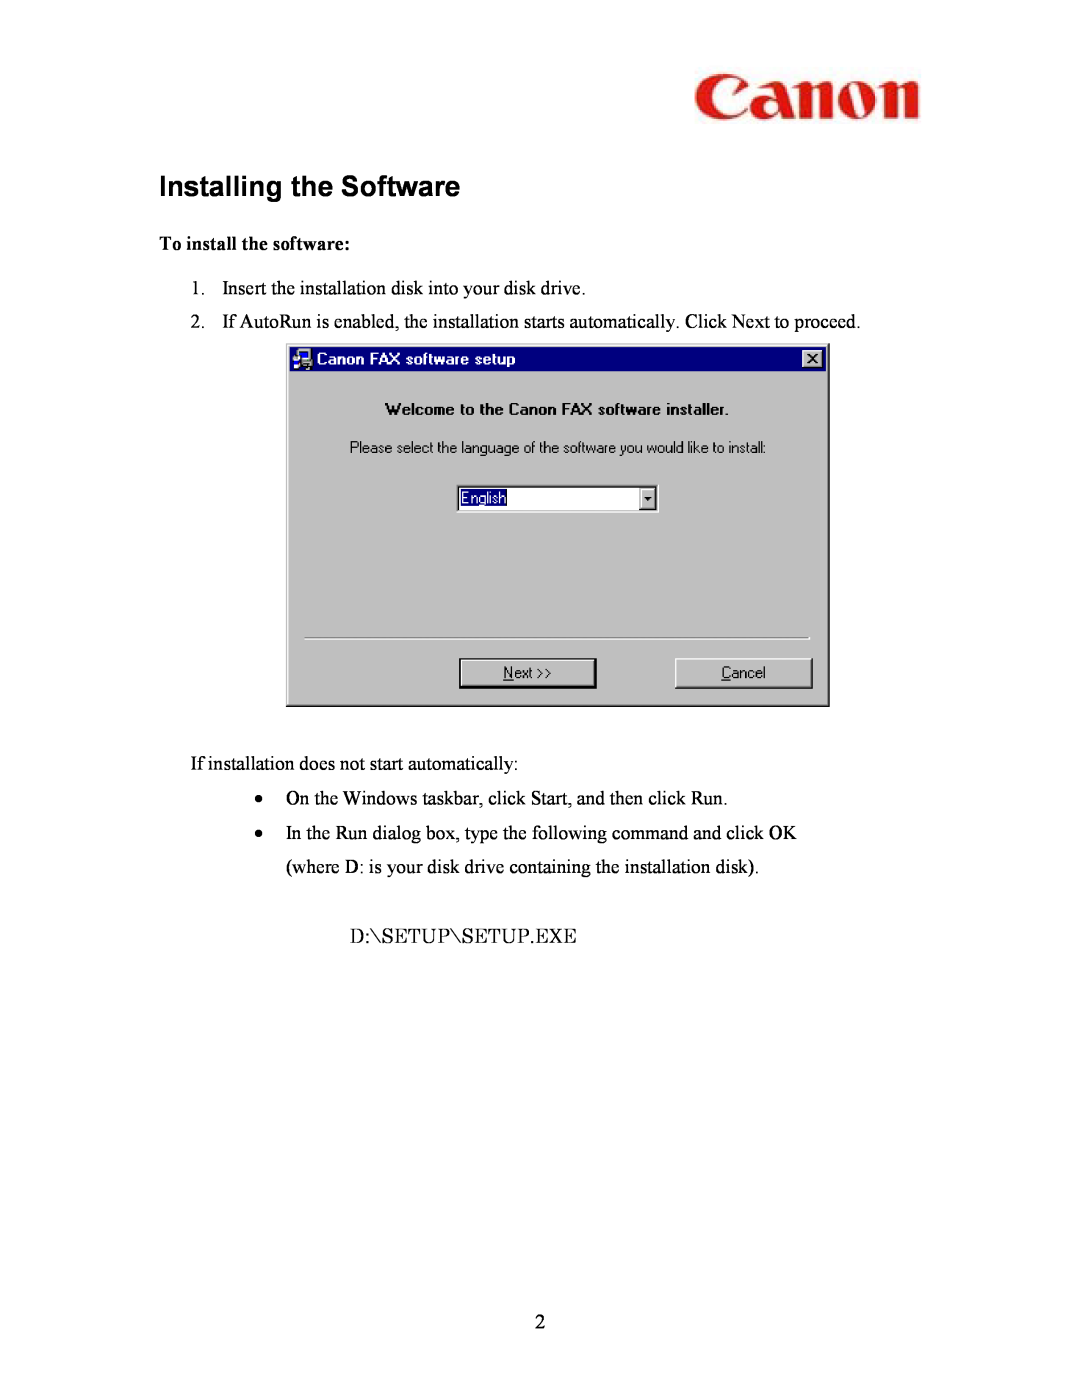 Canon FAX-L350 manual Installing the Software, To install the software 